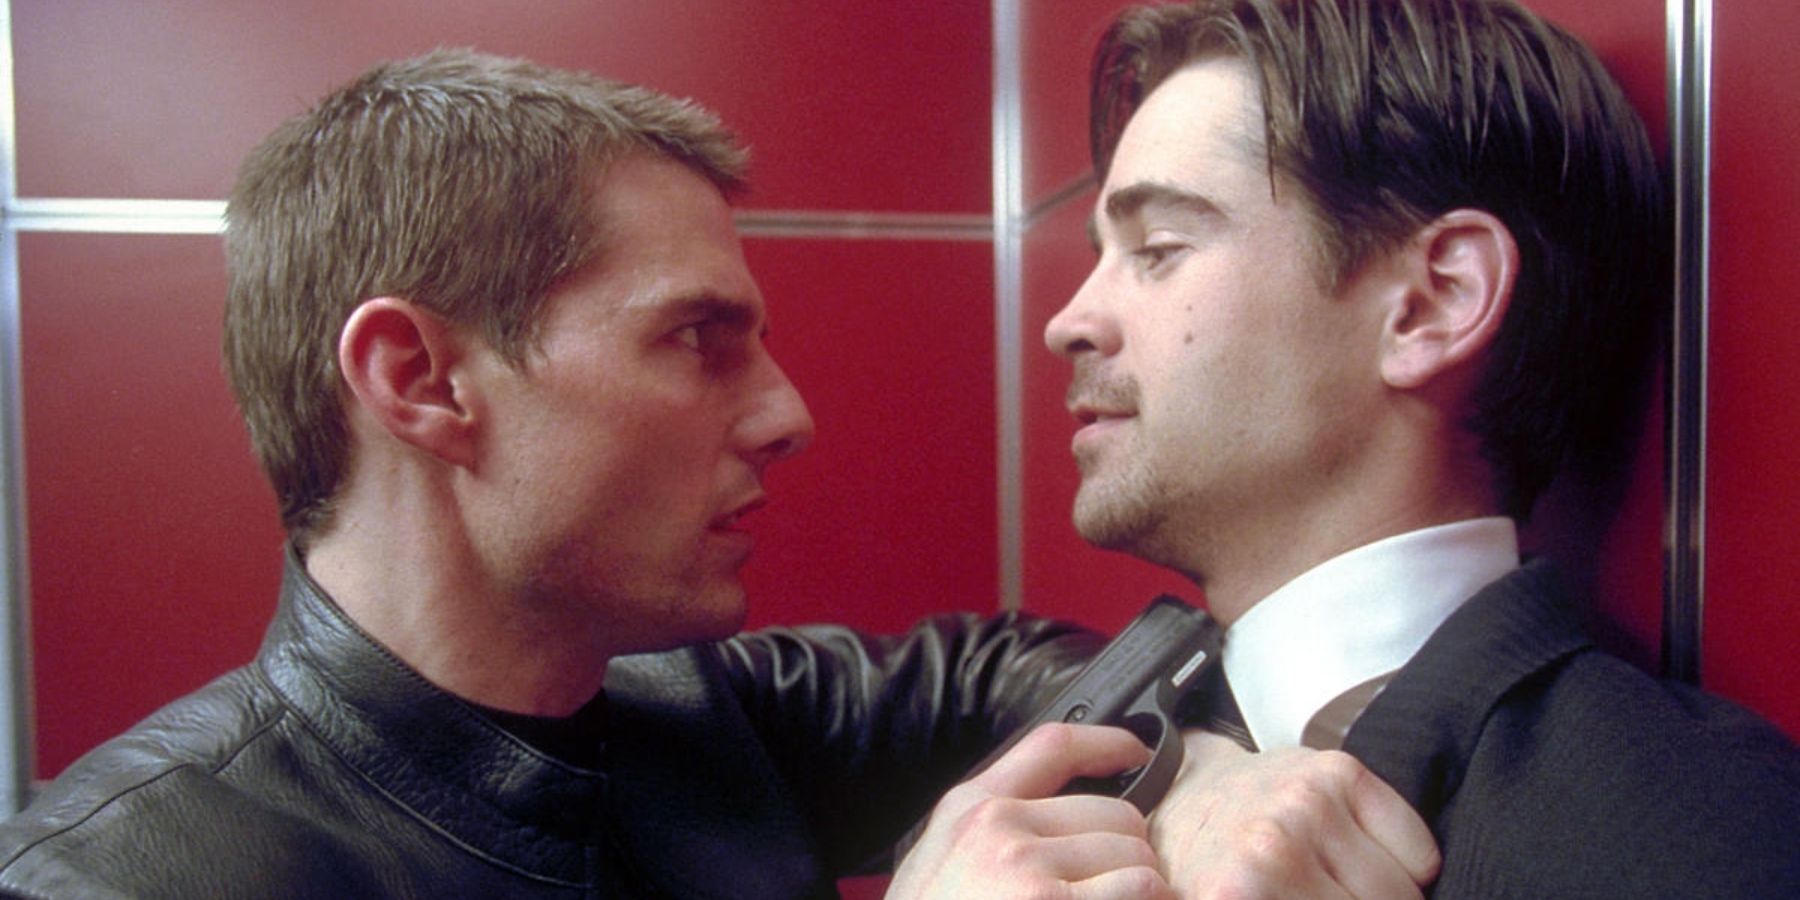 Tom Cruise and Colin Farrell in Minority Report